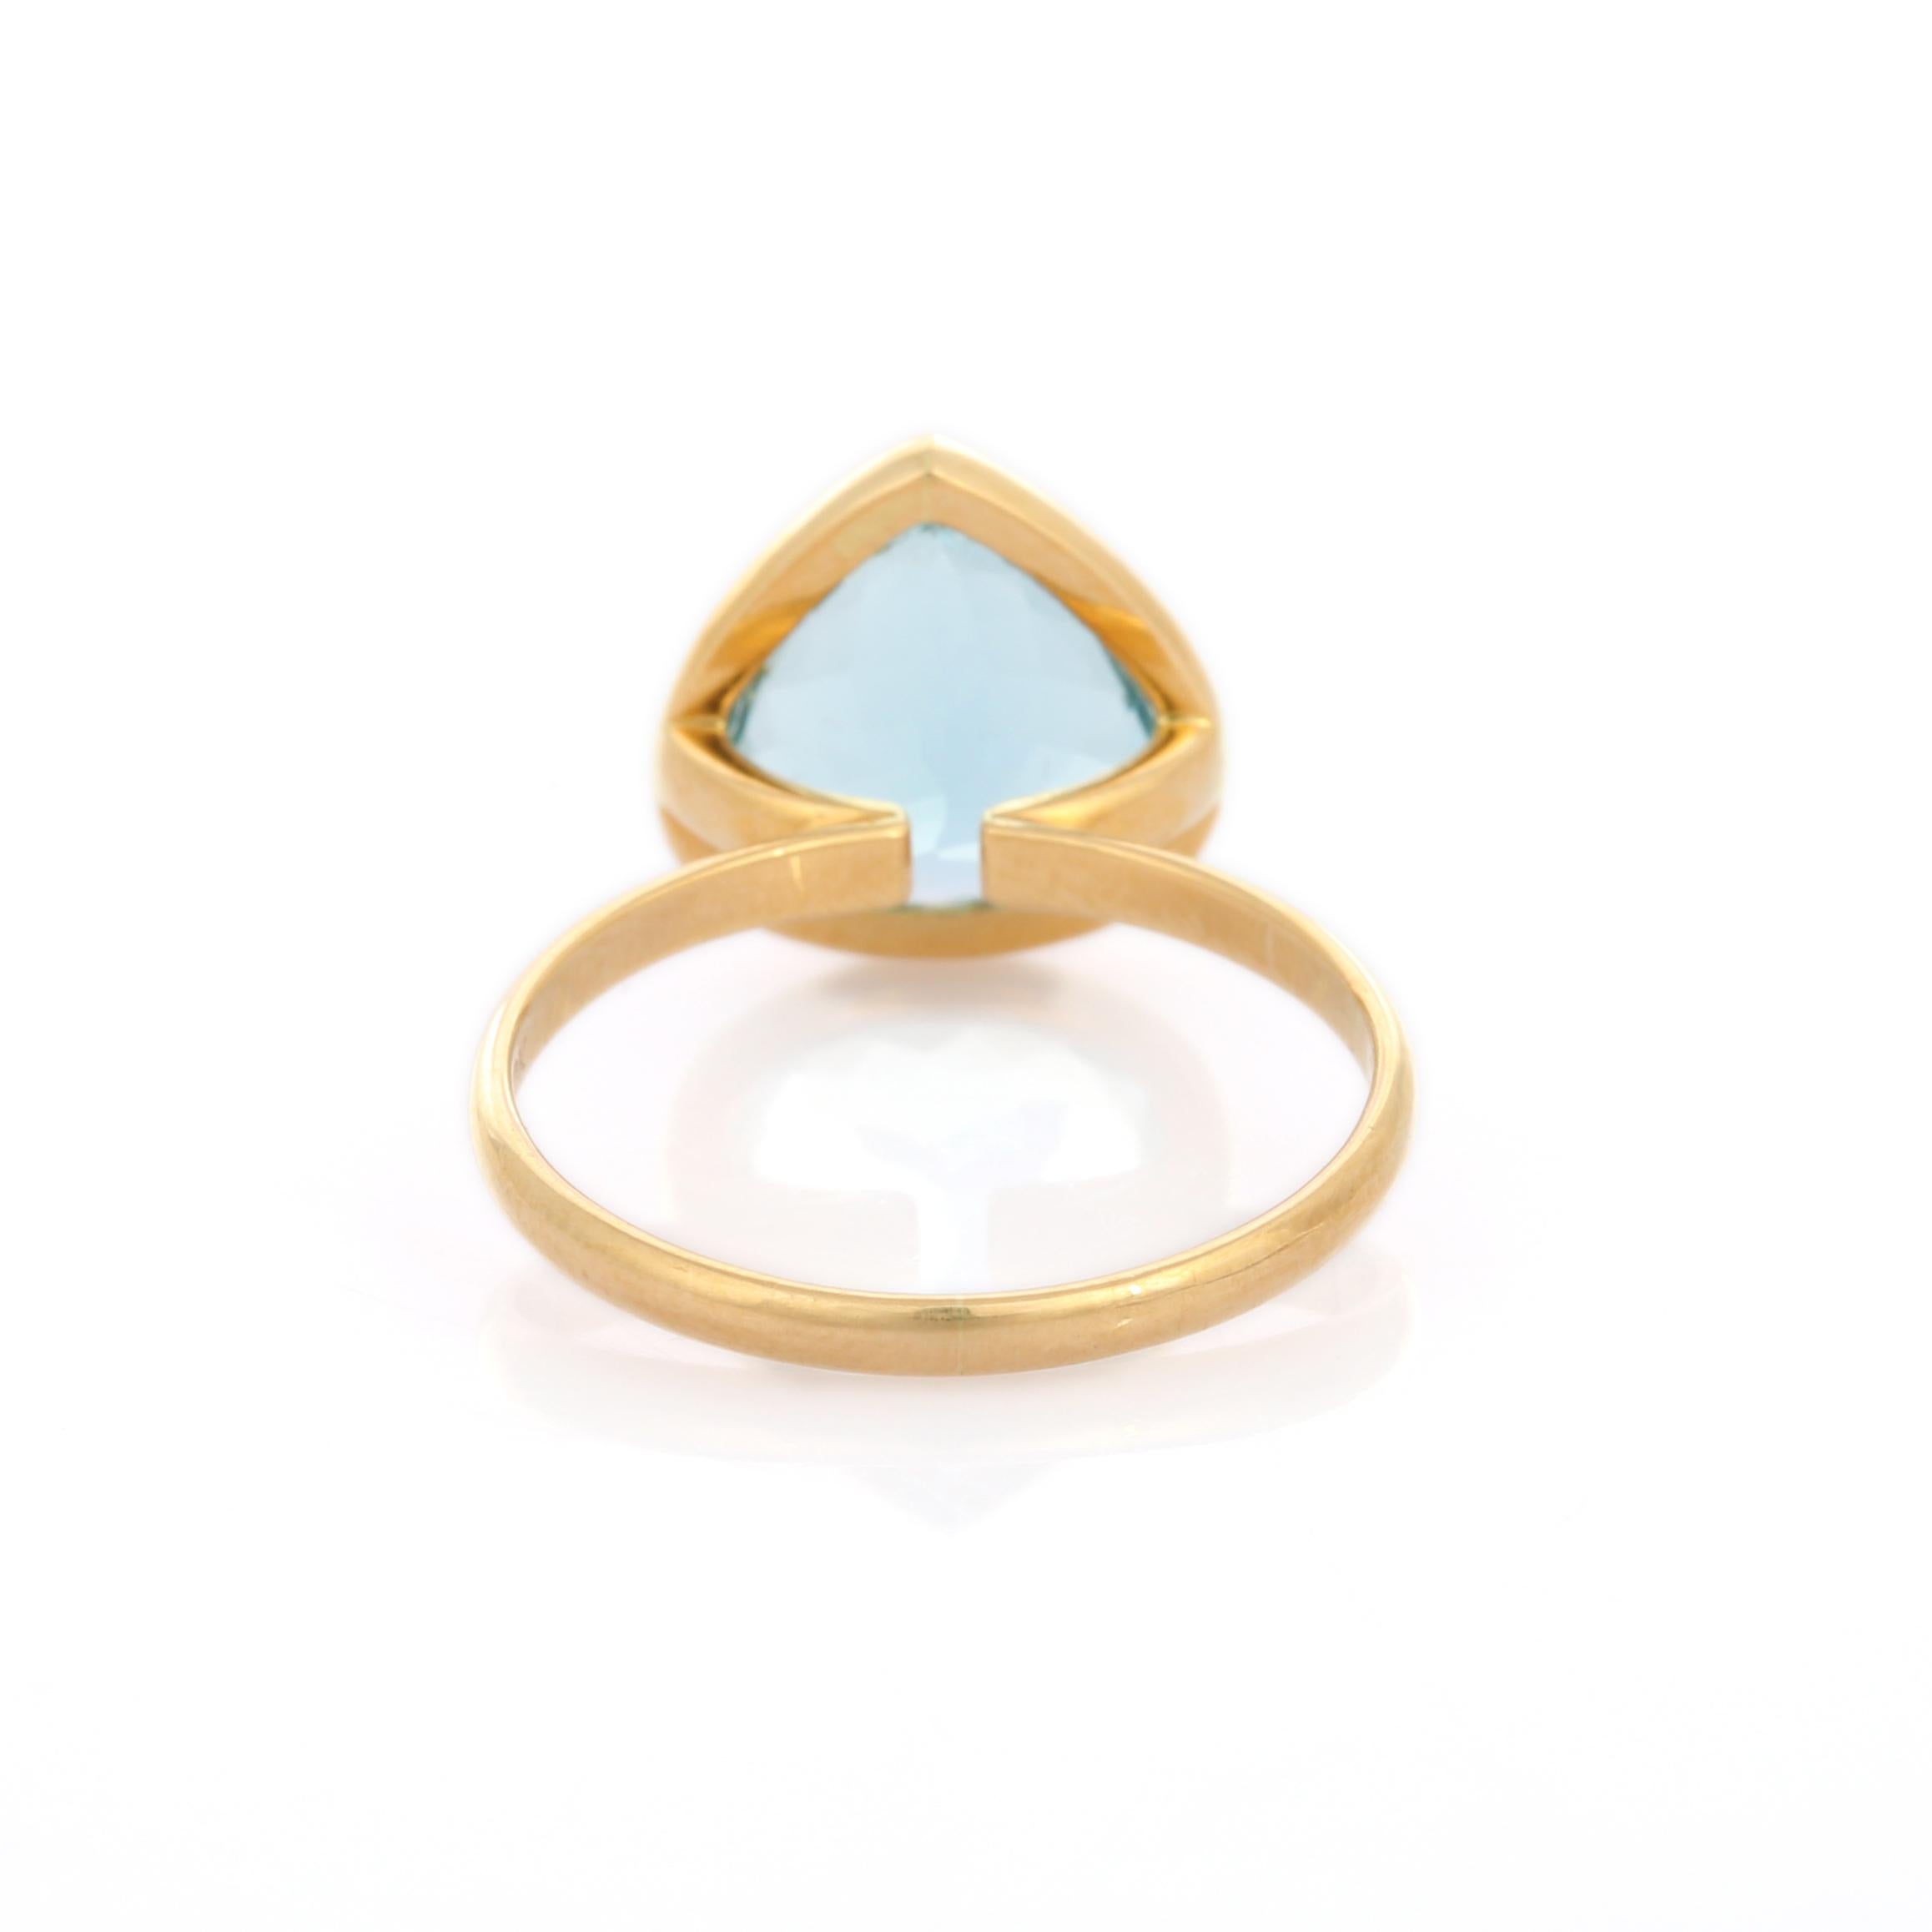 For Sale:  18K Yellow Gold Pear Cut Aquamarine Solitaire Ring 6